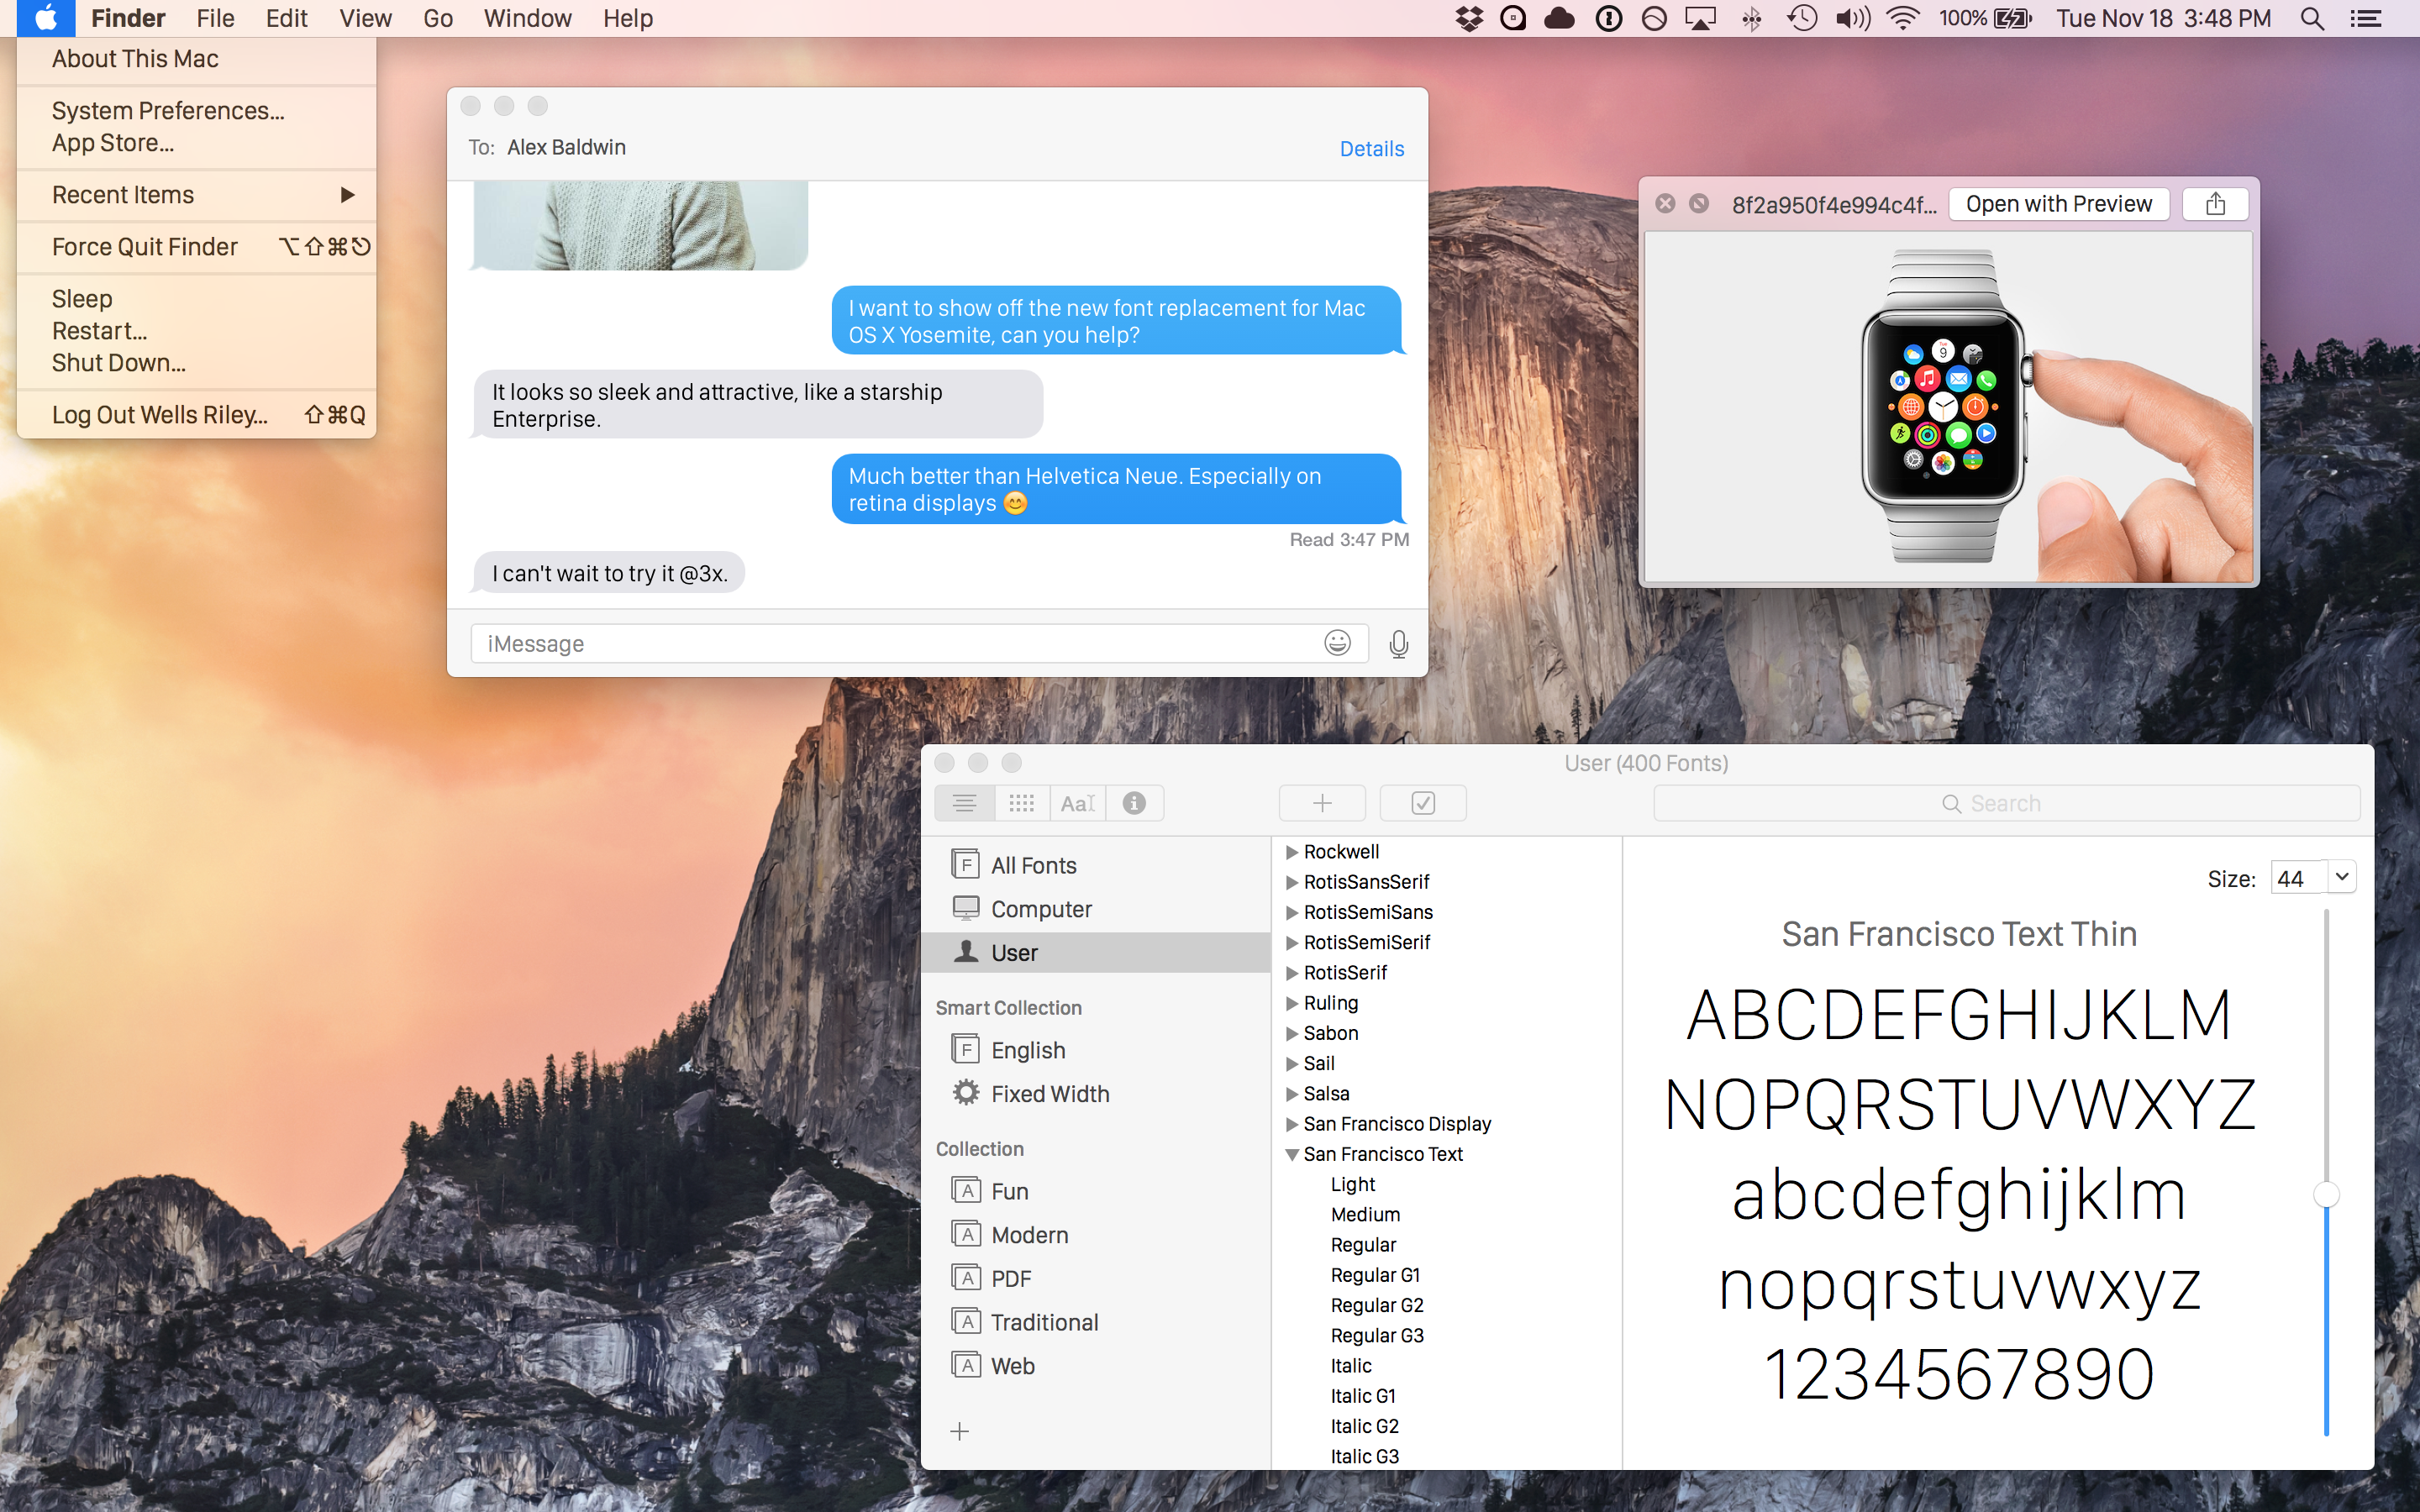 OS X Yosemite with San Francisco font from Apple Watch